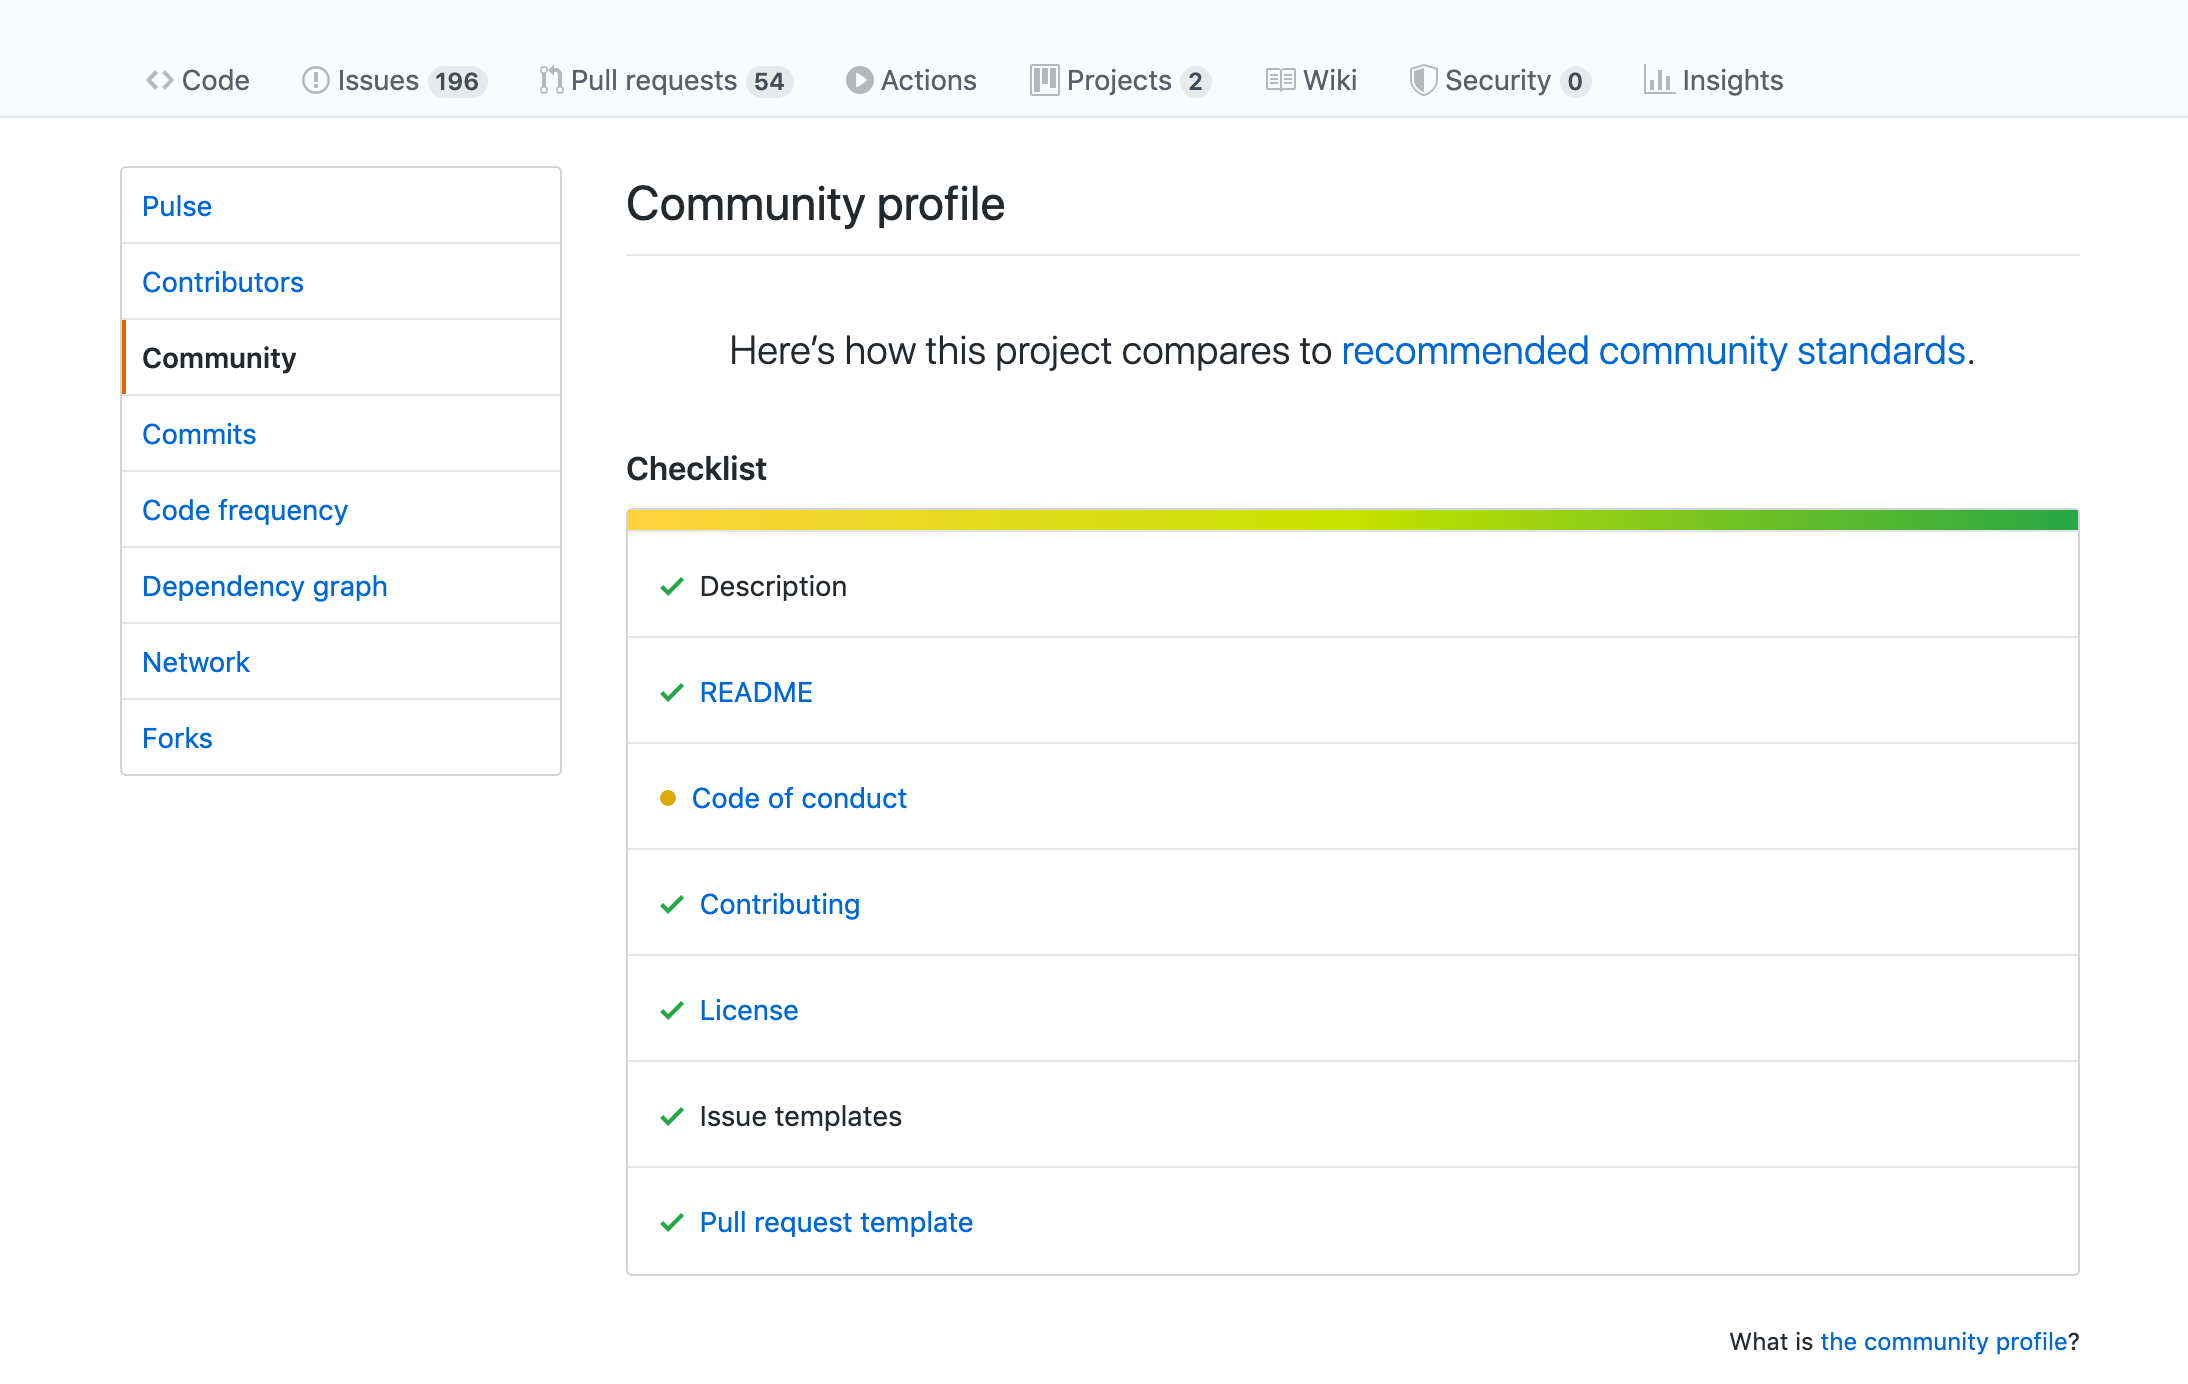 Image of a checklist in Community section of Insights tab of a GitHub project.